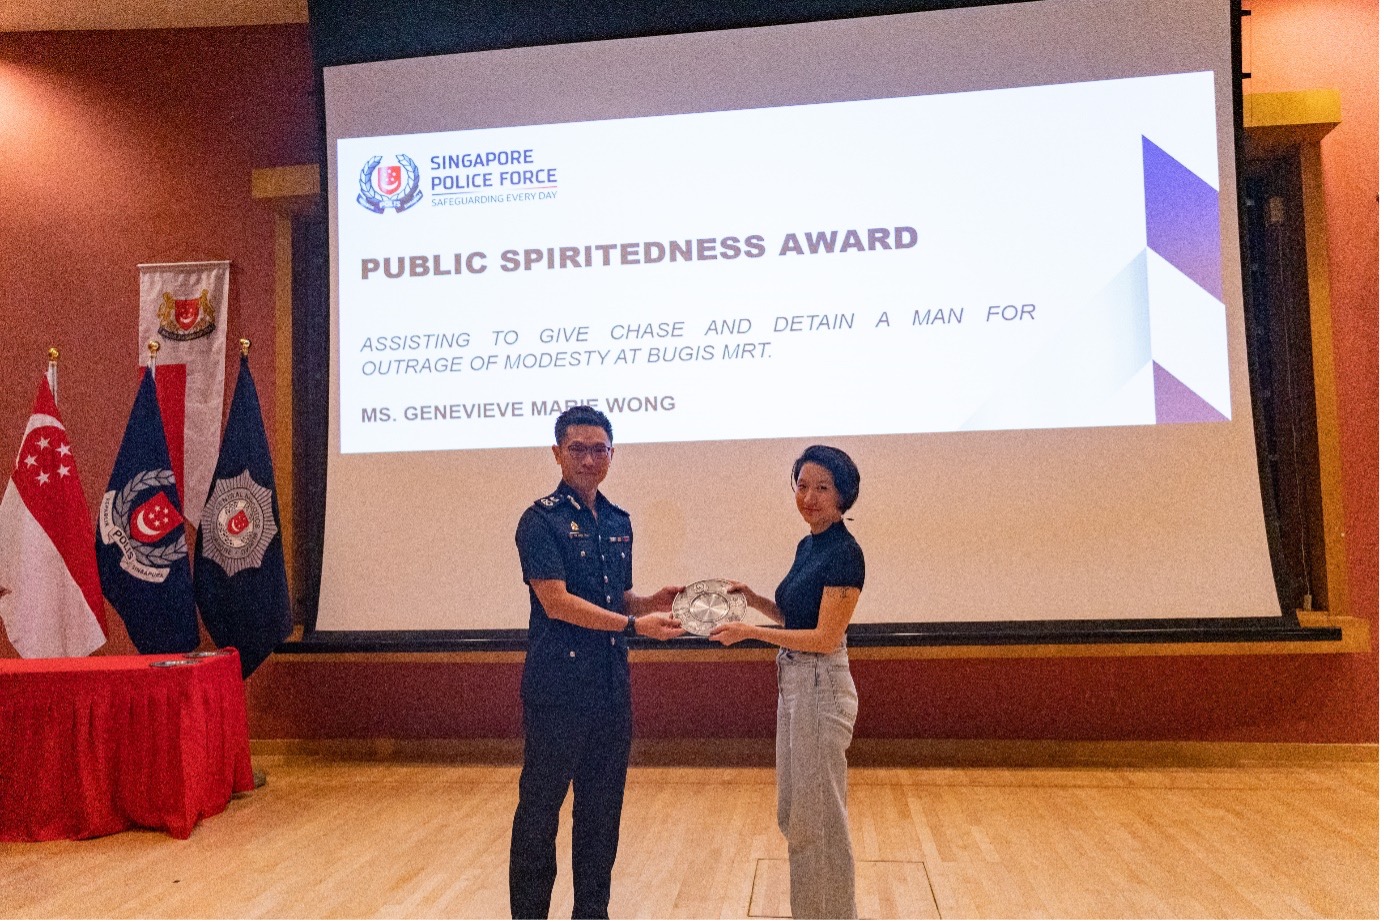 20220818_eleven_members_of_the_public_presented_with_public_spiritedness_award4